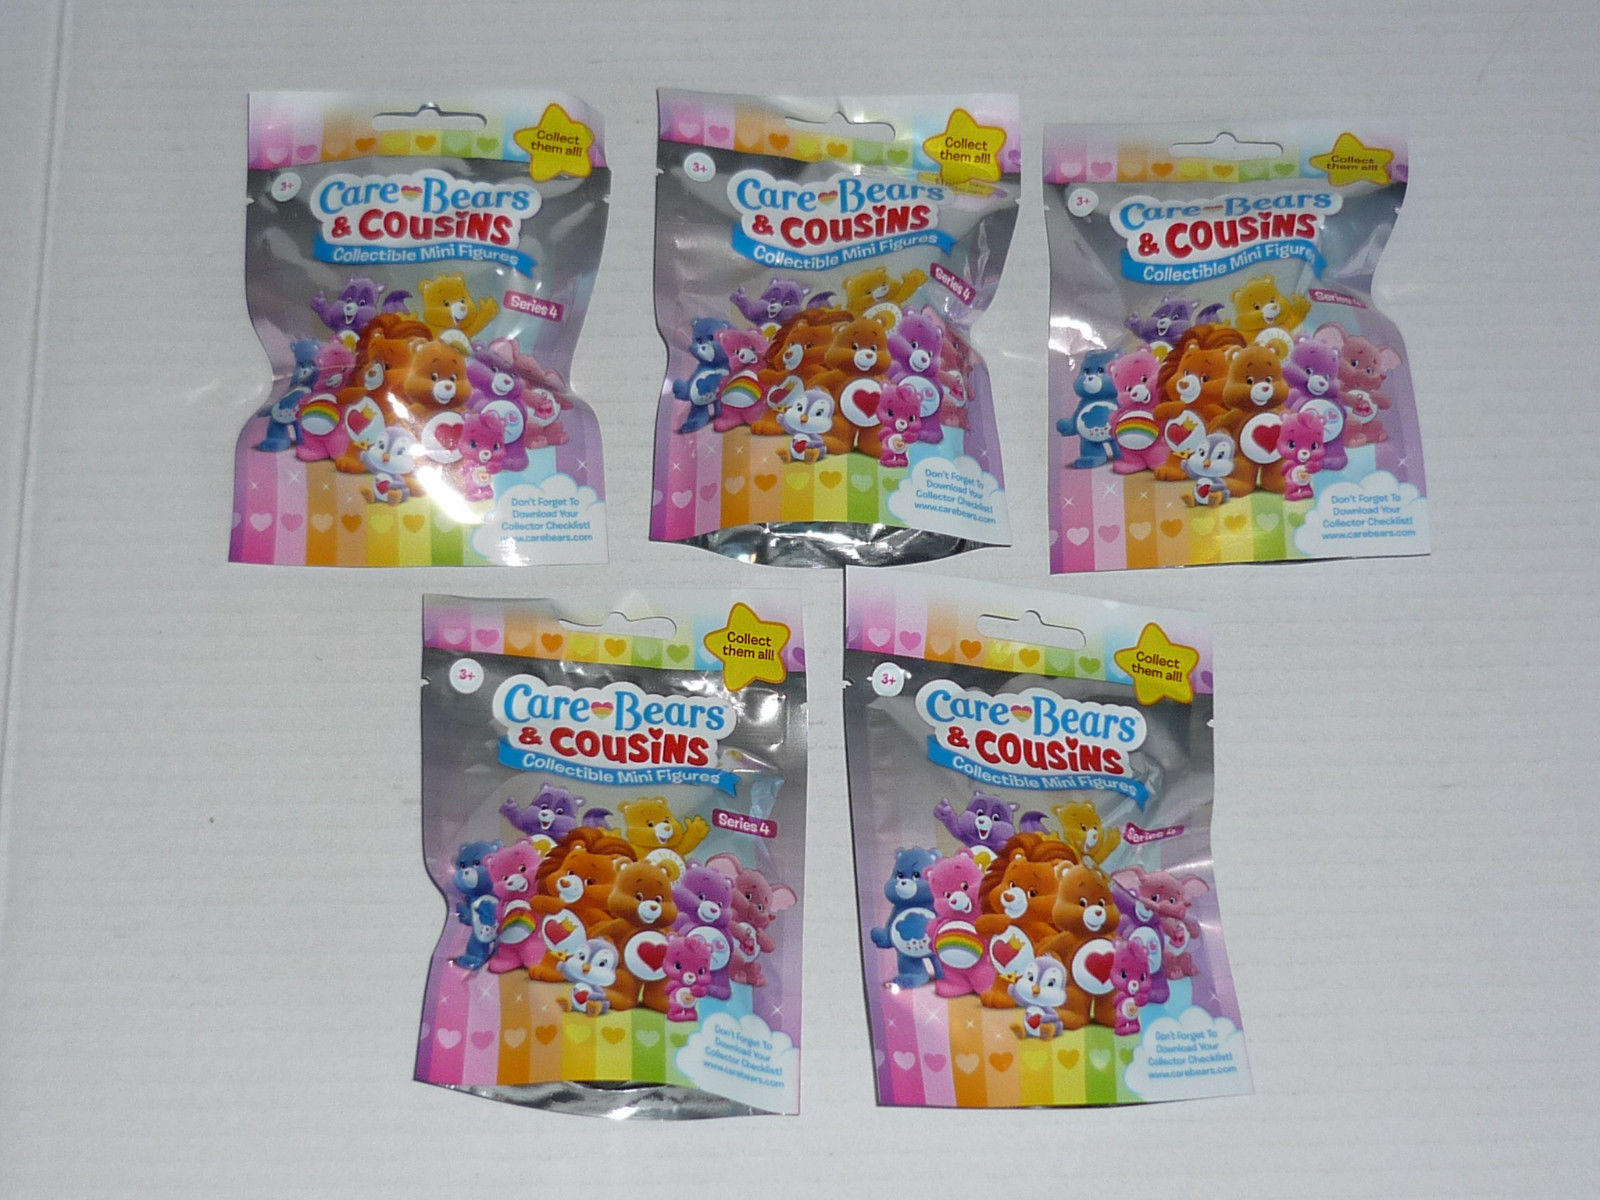 Care Bears & Cousins Mini Figure Blind Bags Lot of 5 SERIES 4 New Sealed Bags